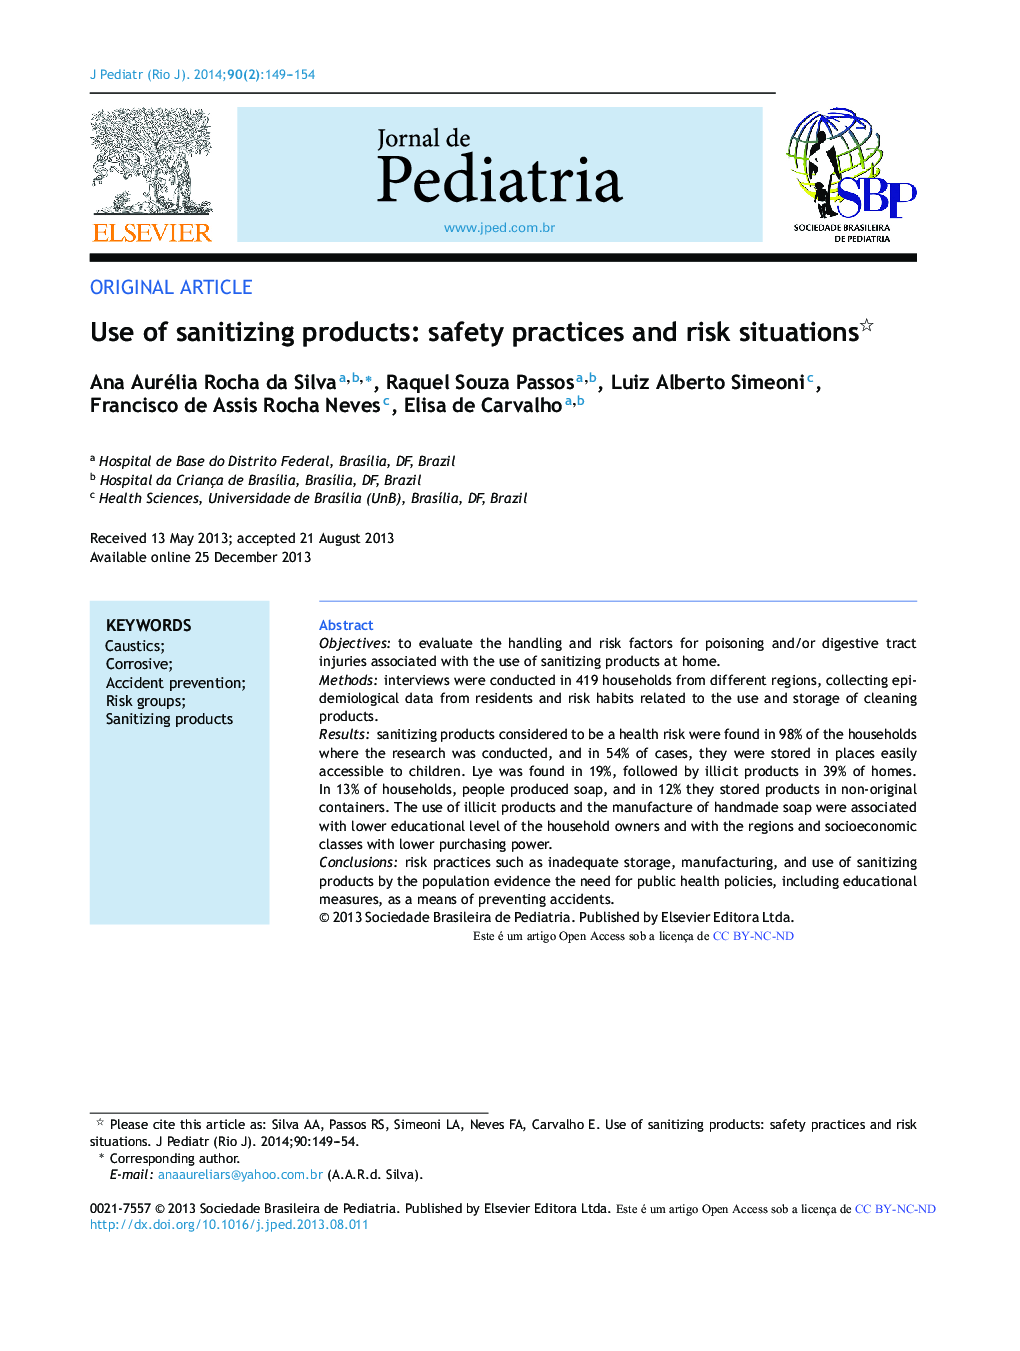 Use of sanitizing products: safety practices and risk situations 